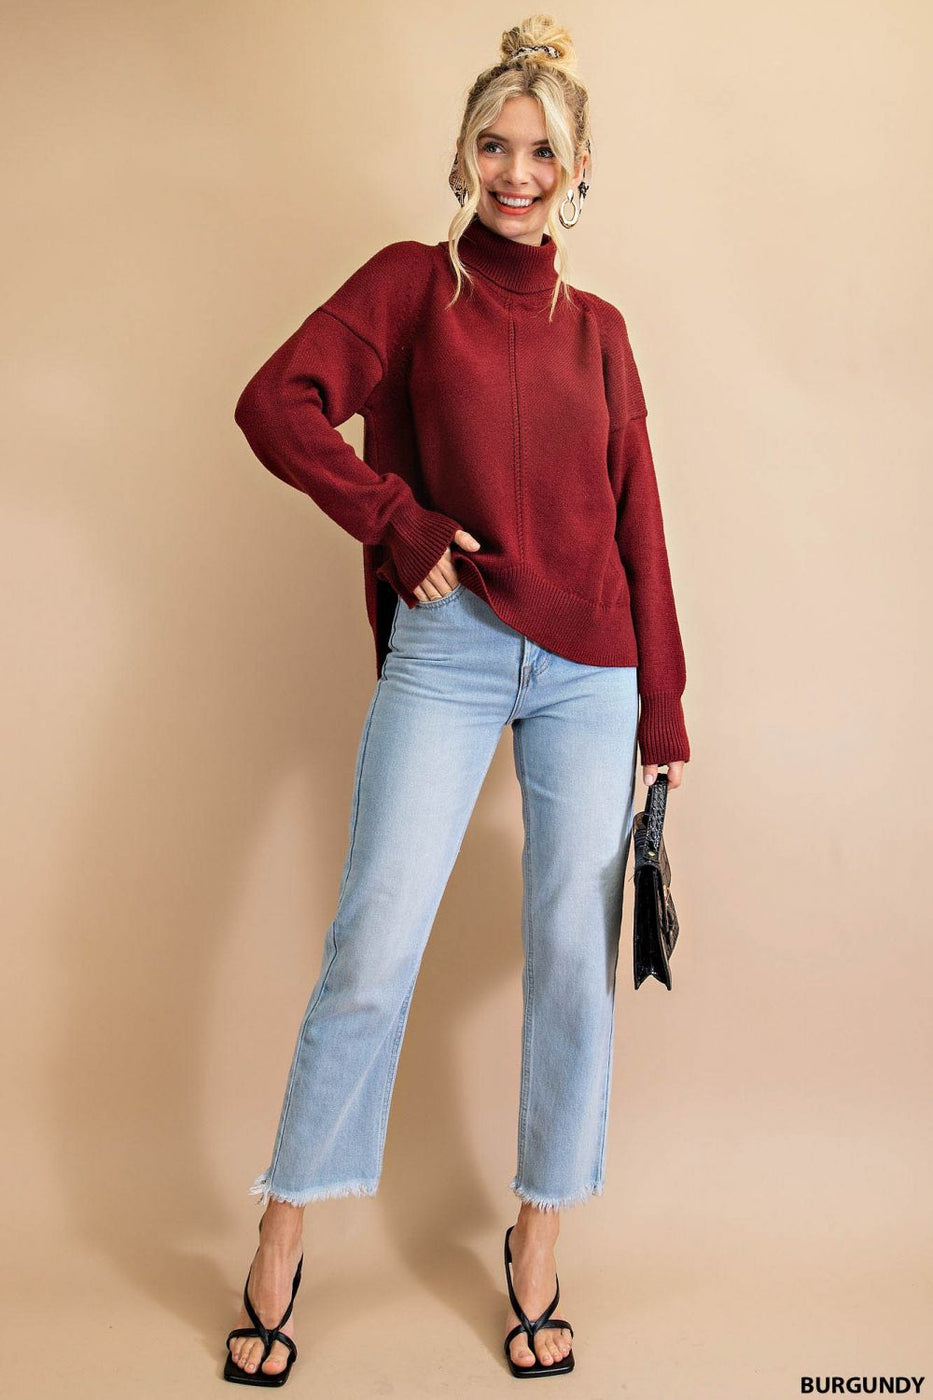 Olive and Leaf Mock Turtle Neck Sweater - Burgundy available at The Good Life Boutique